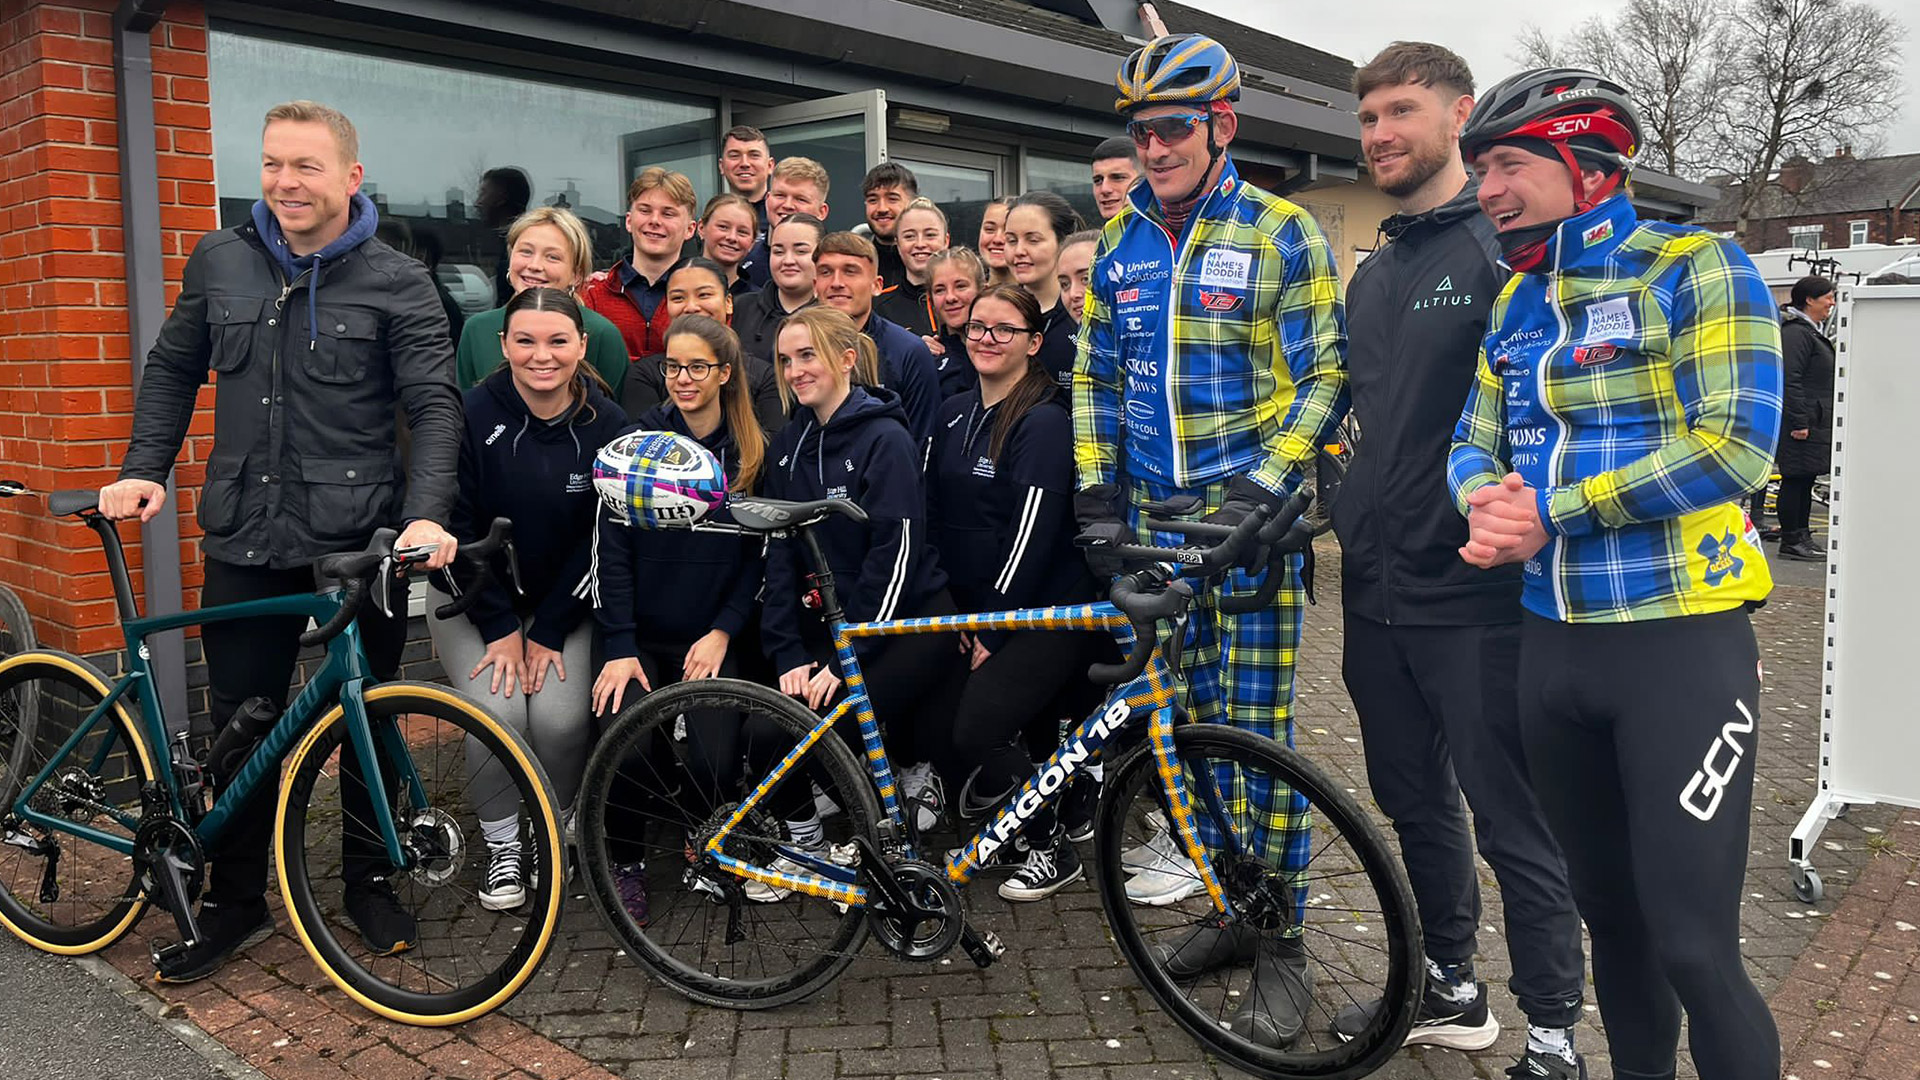 Edge Hill University Sports Therapy students pose with cyclists from the Doddie Weir charity ride